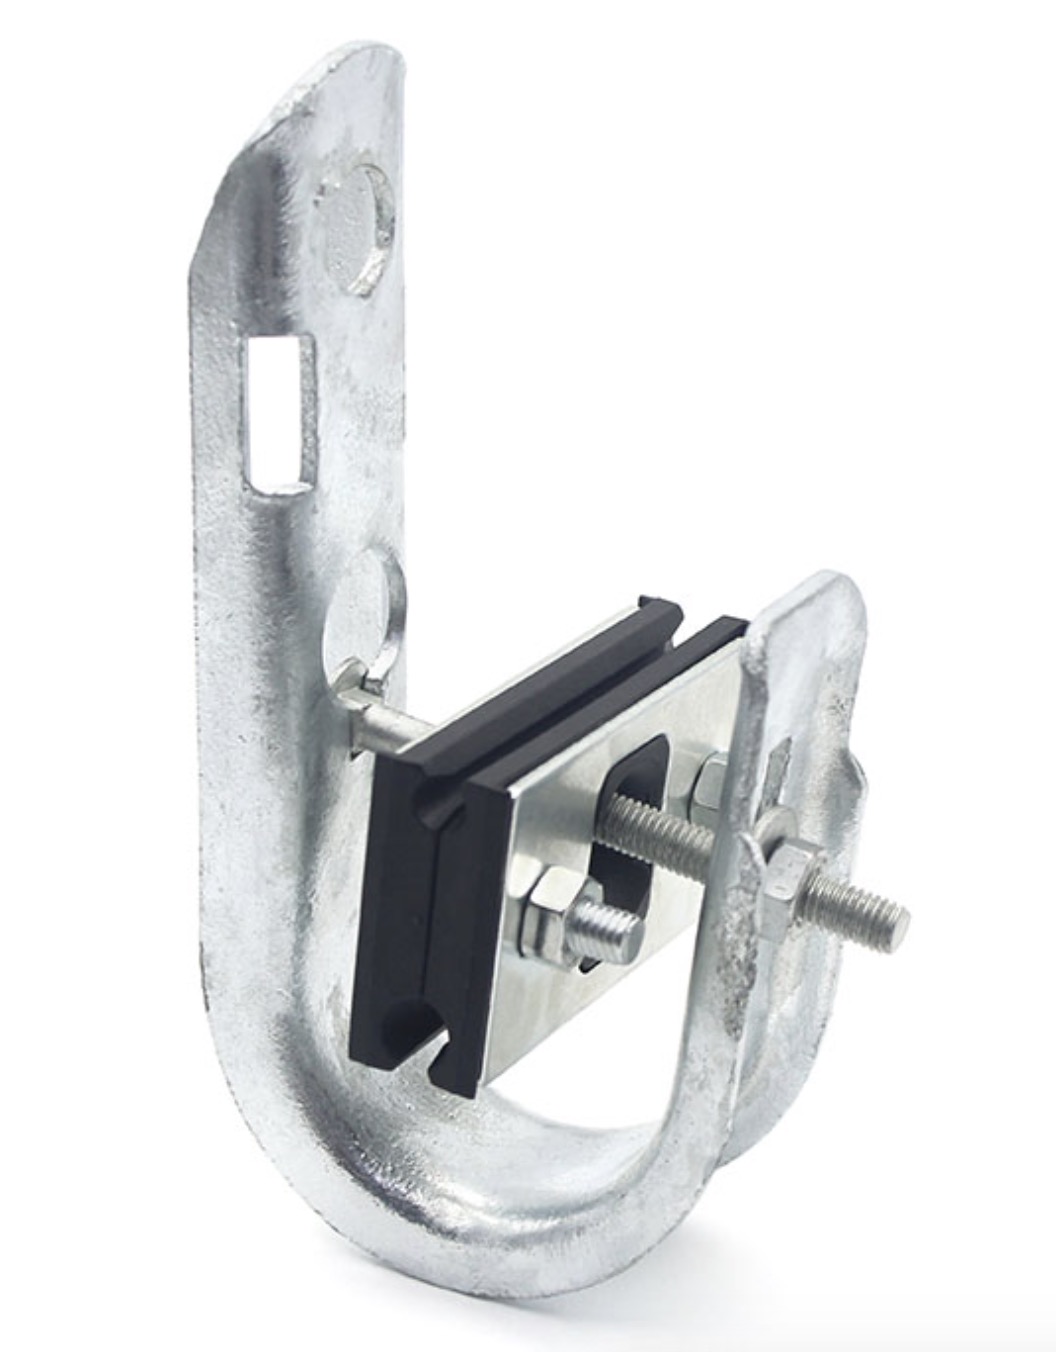 FTTH Suspension Clamp for Figure-8 Cables